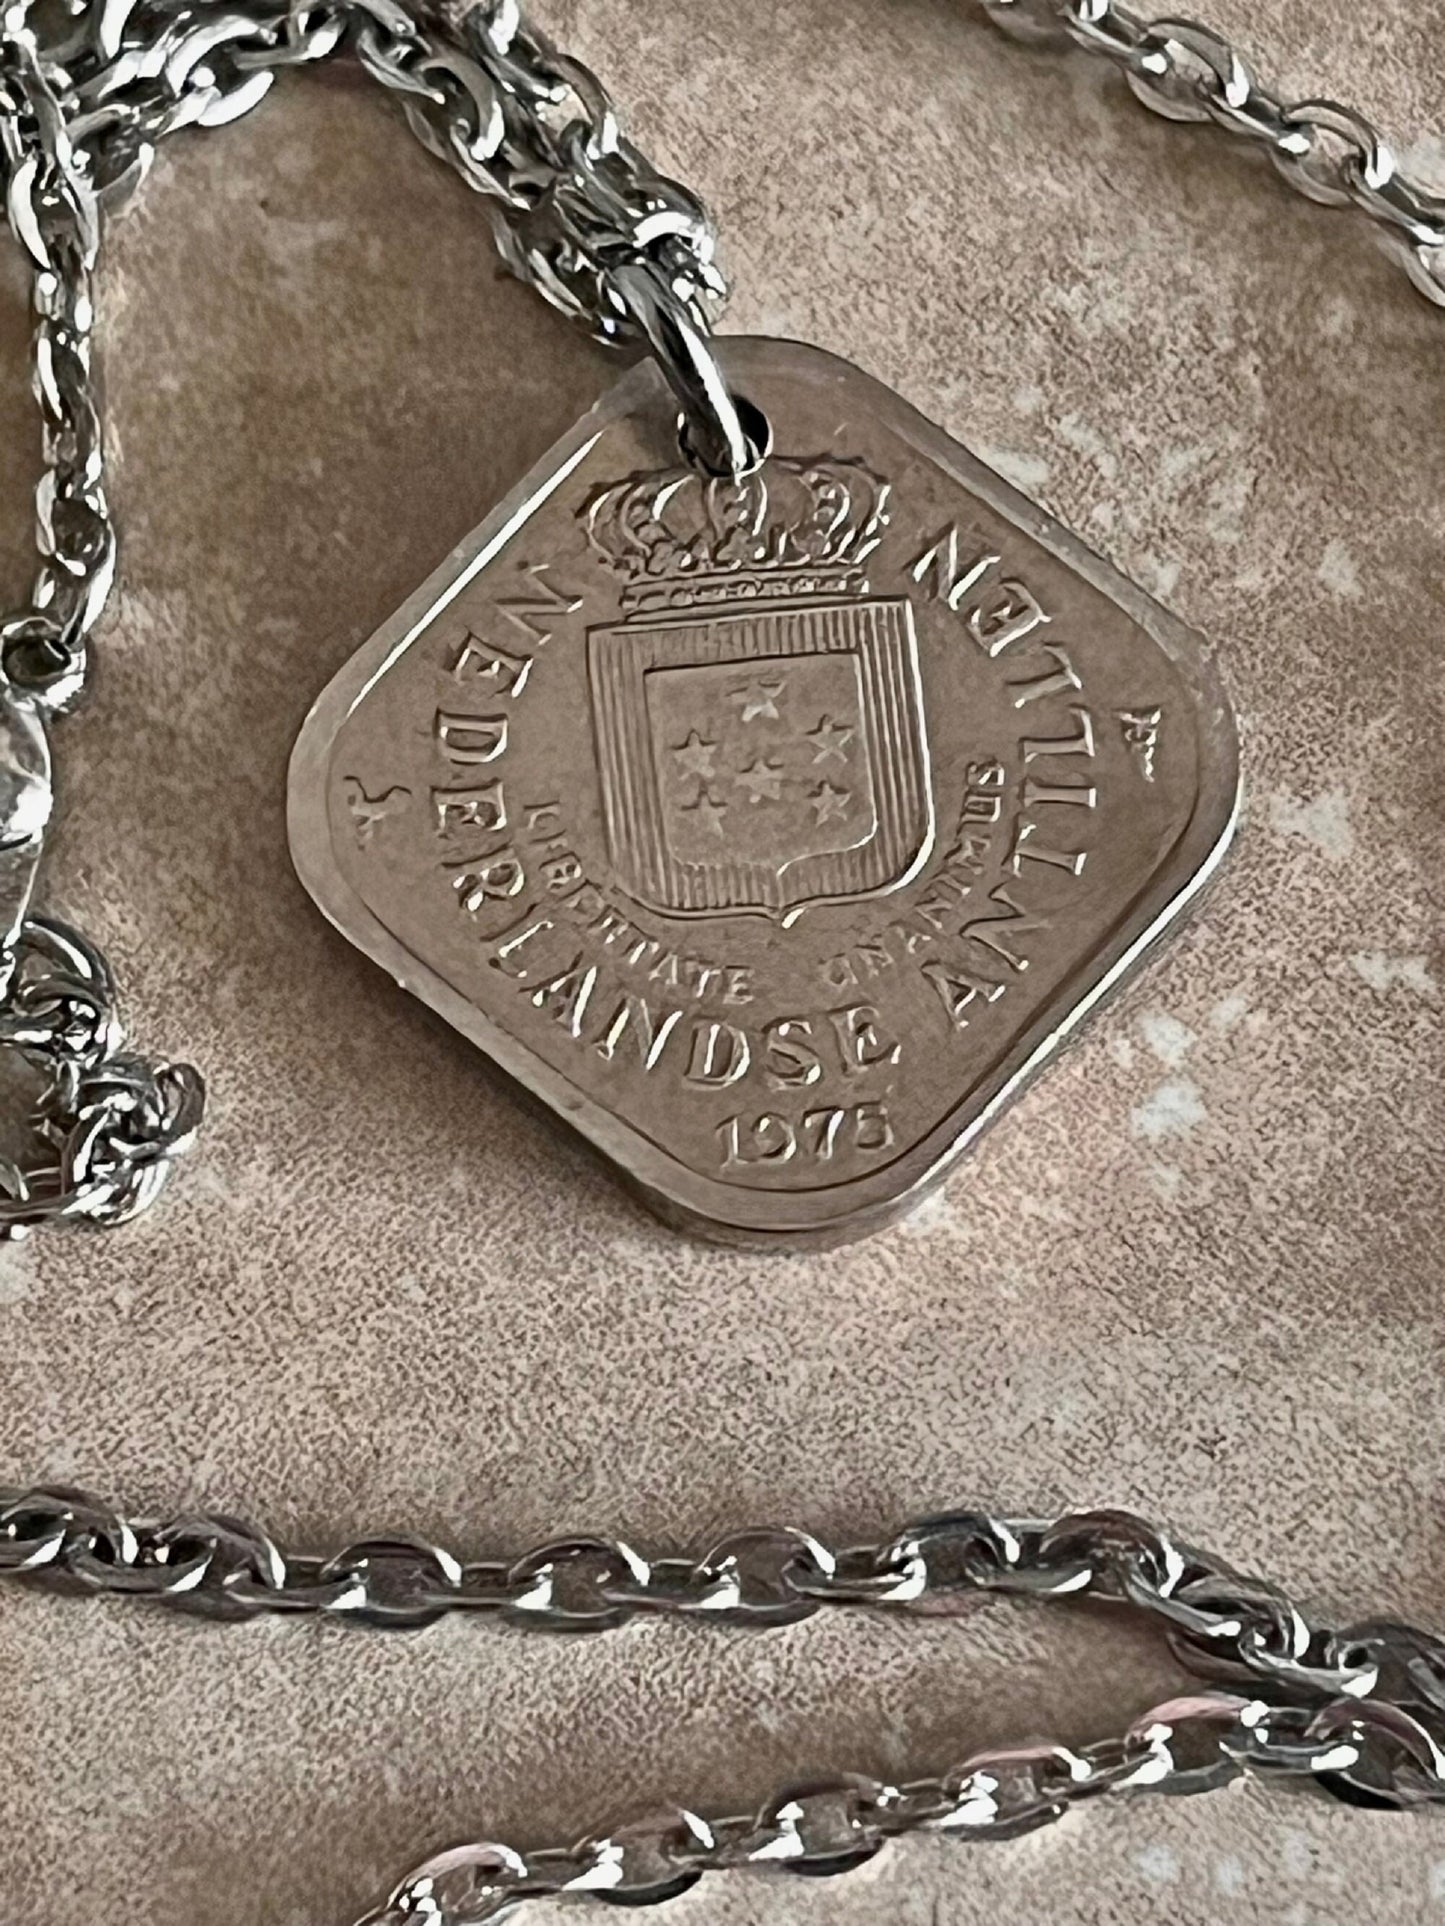 Netherlands Antillen Coin Necklace 5 Cents Pendant Personal Old Vintage Handmade Jewelry Gift Friend Charm For Him Her World Coin Collector